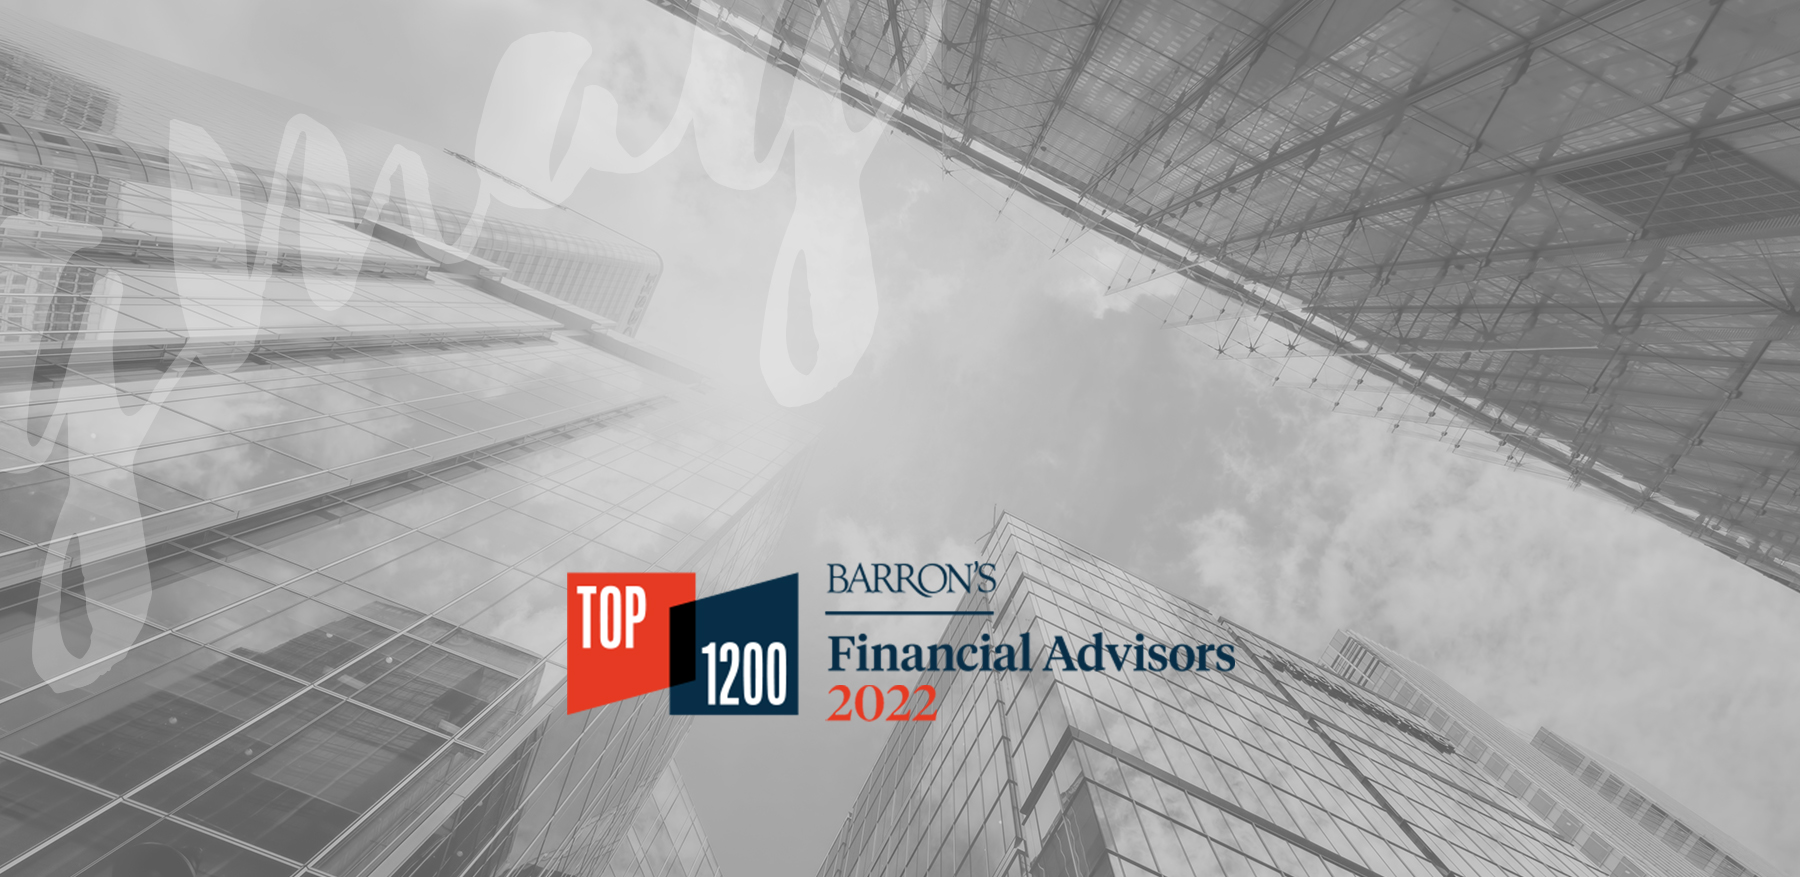 GMAG Named to Barron’s Top 1200 Financial Advisors for 2022